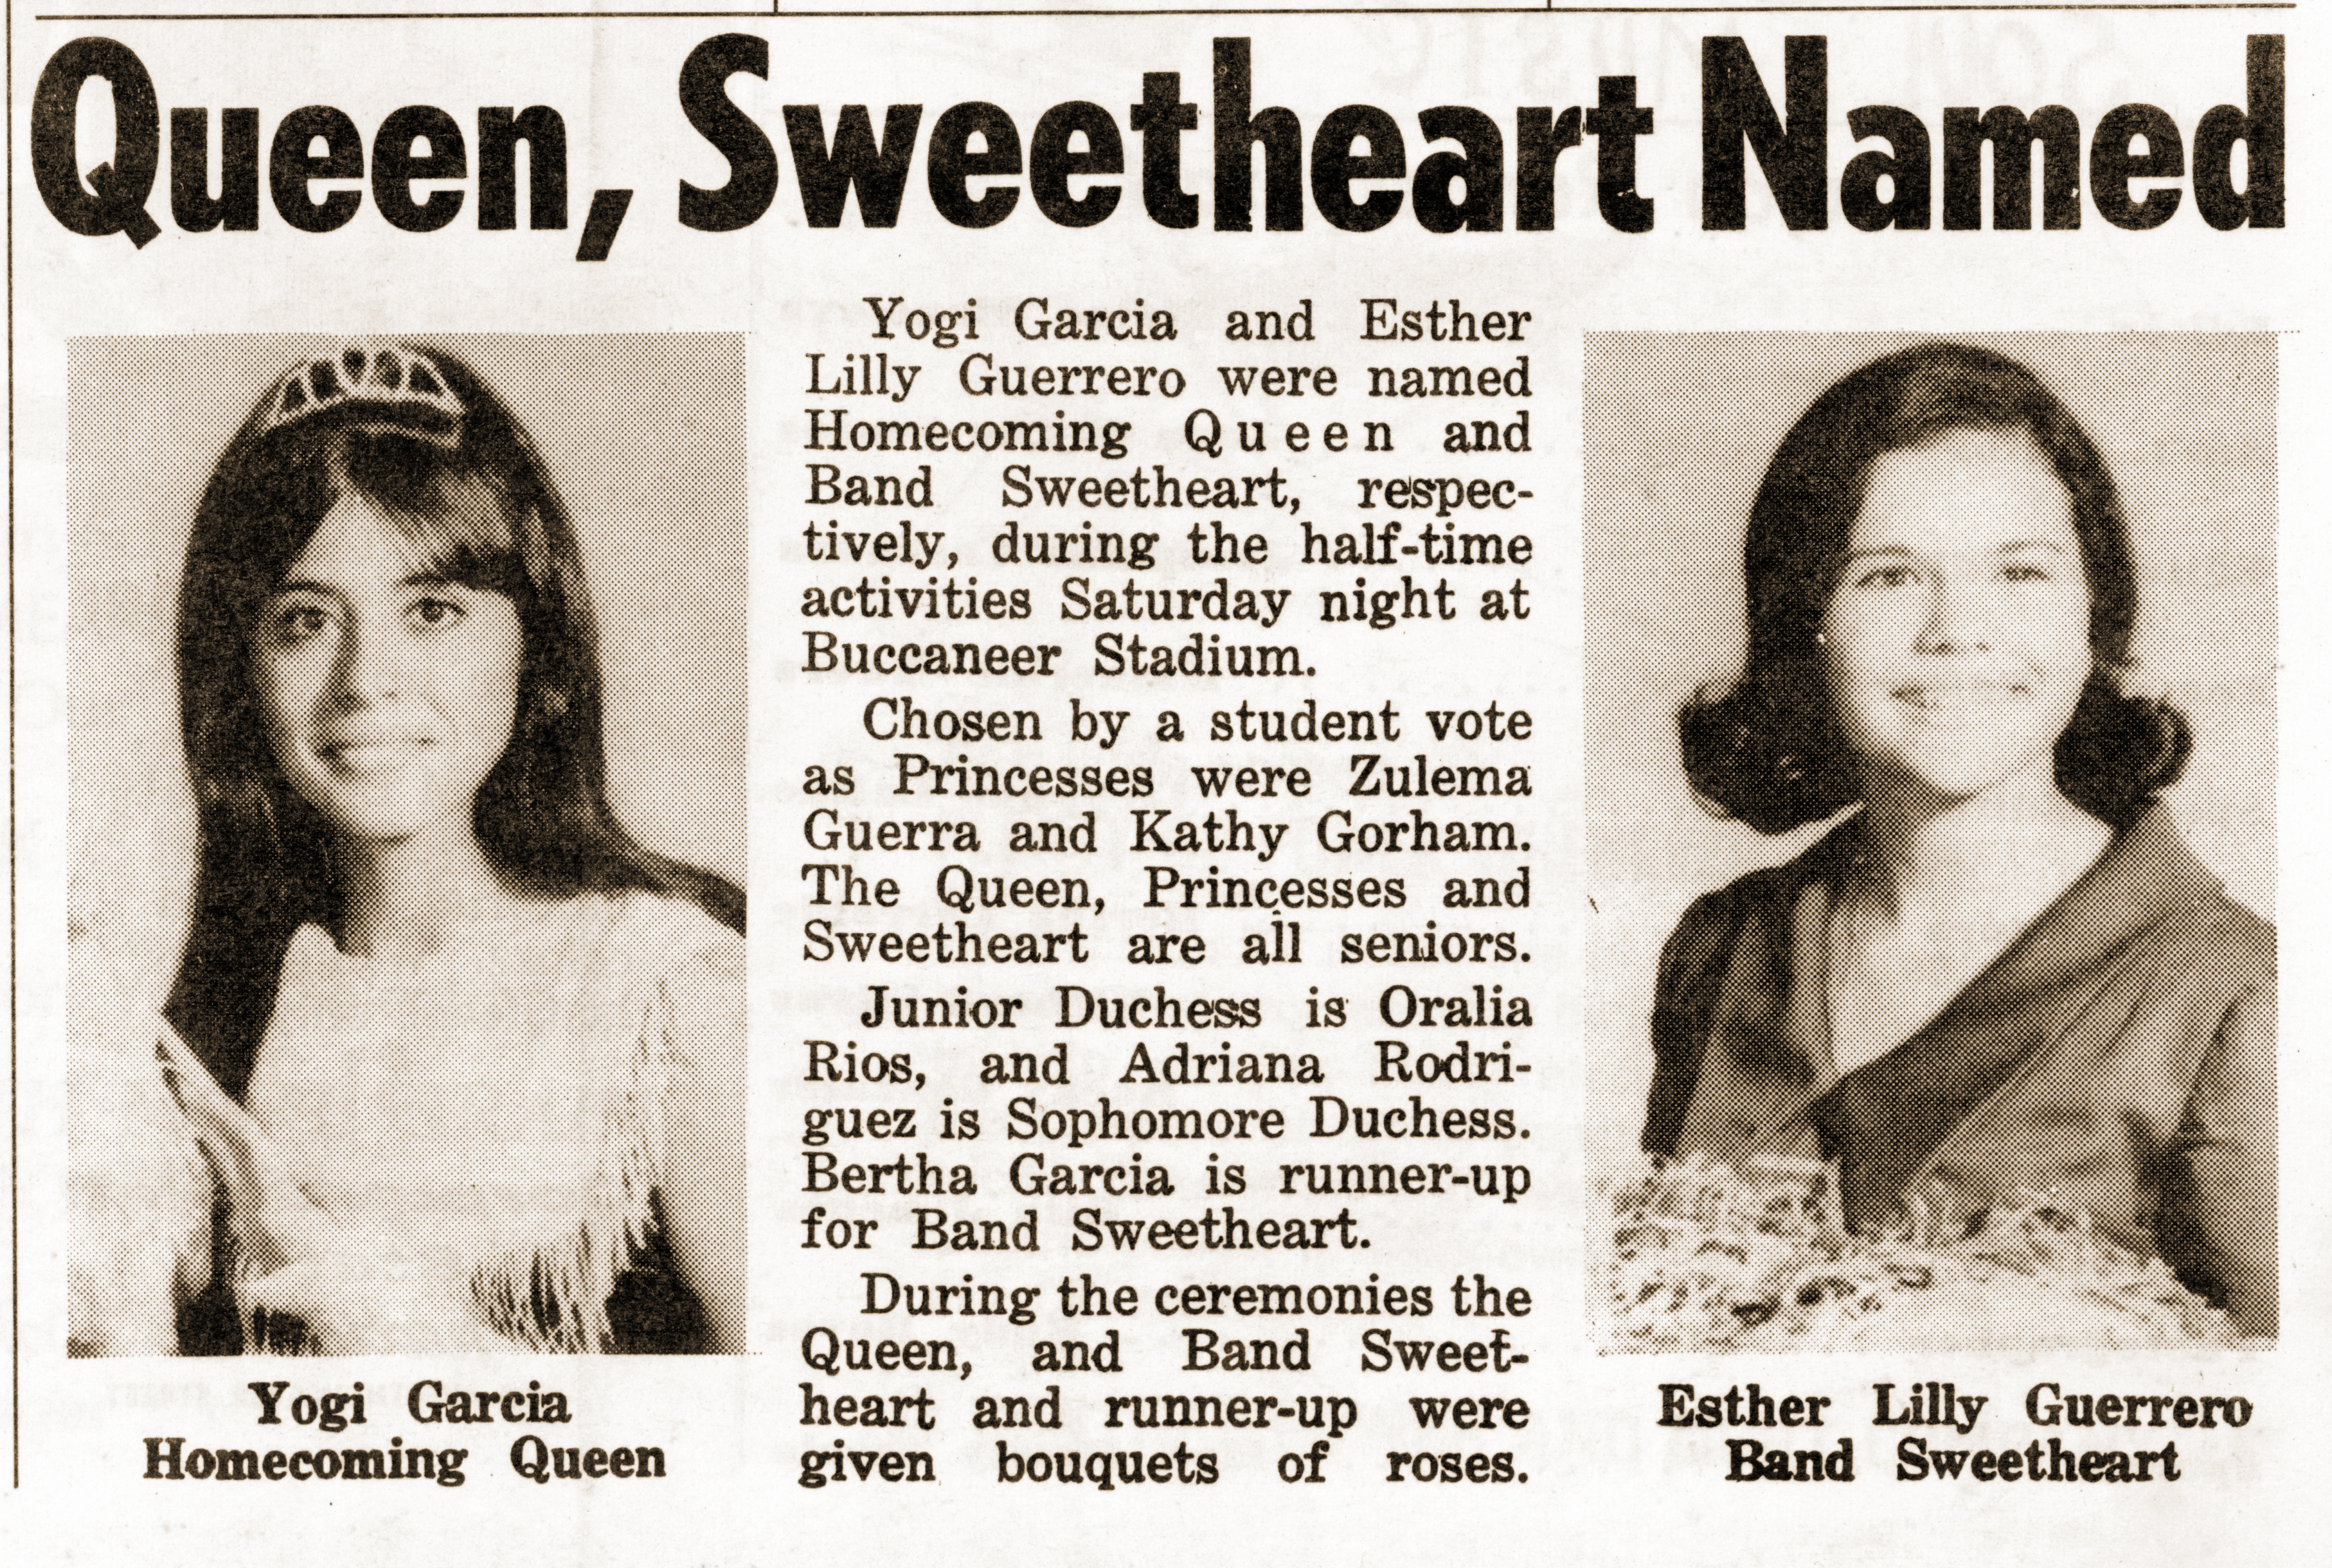 
NOTE: Photos are reversed in newspaper. Yogi Garcia was named Homecoming Queen is in photo on the right and Esther Lilly Guerrero in photo on the left was named Band Sweetheart